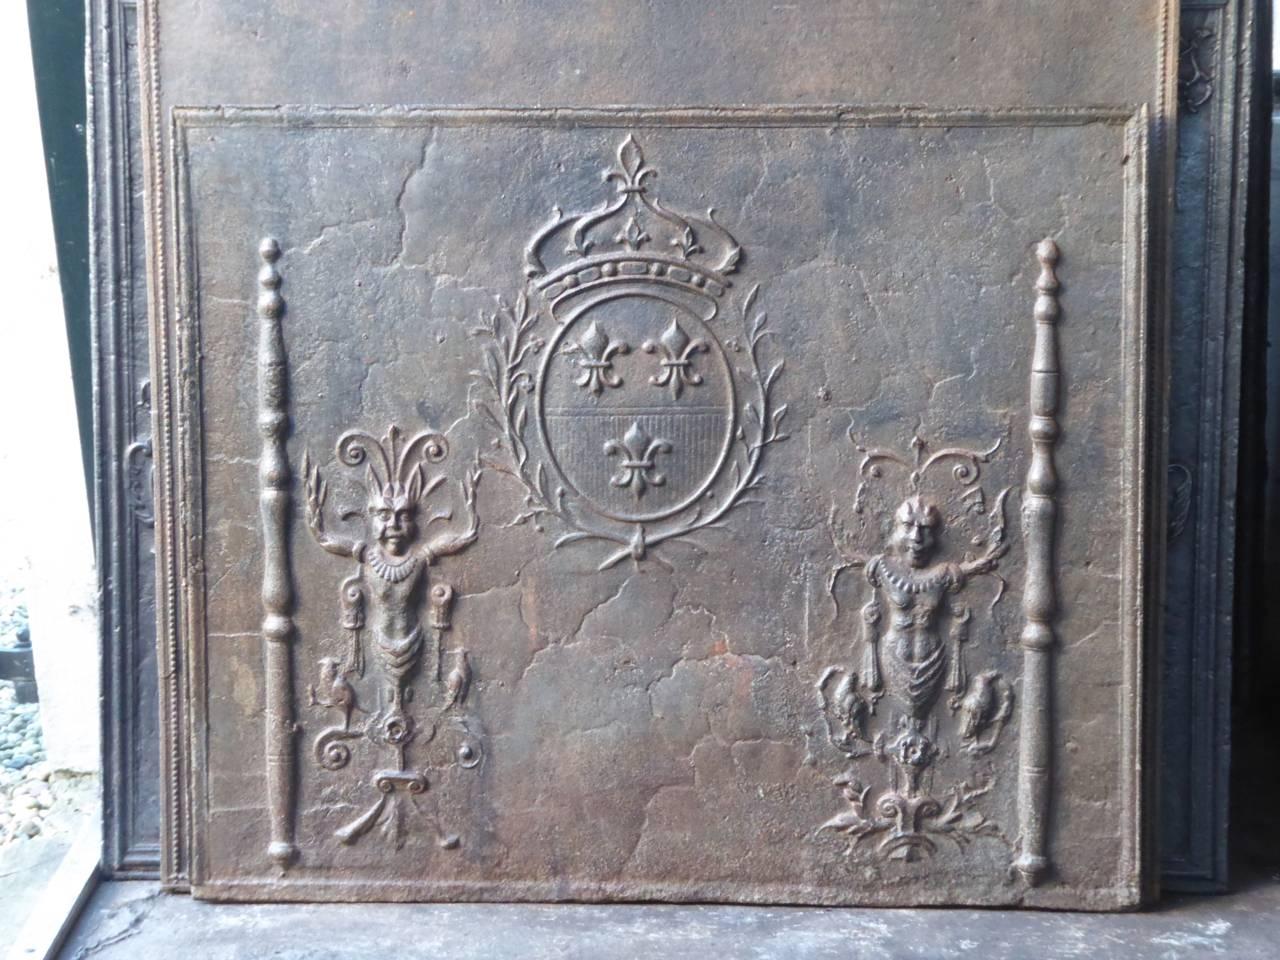 17th century French fireplace fireback with the Arms of France and two decorated pillars.

We have a unique and specialized collection of antique and used fireplace accessories consisting of more than 1000 listings at 1stdibs. Amongst others, we